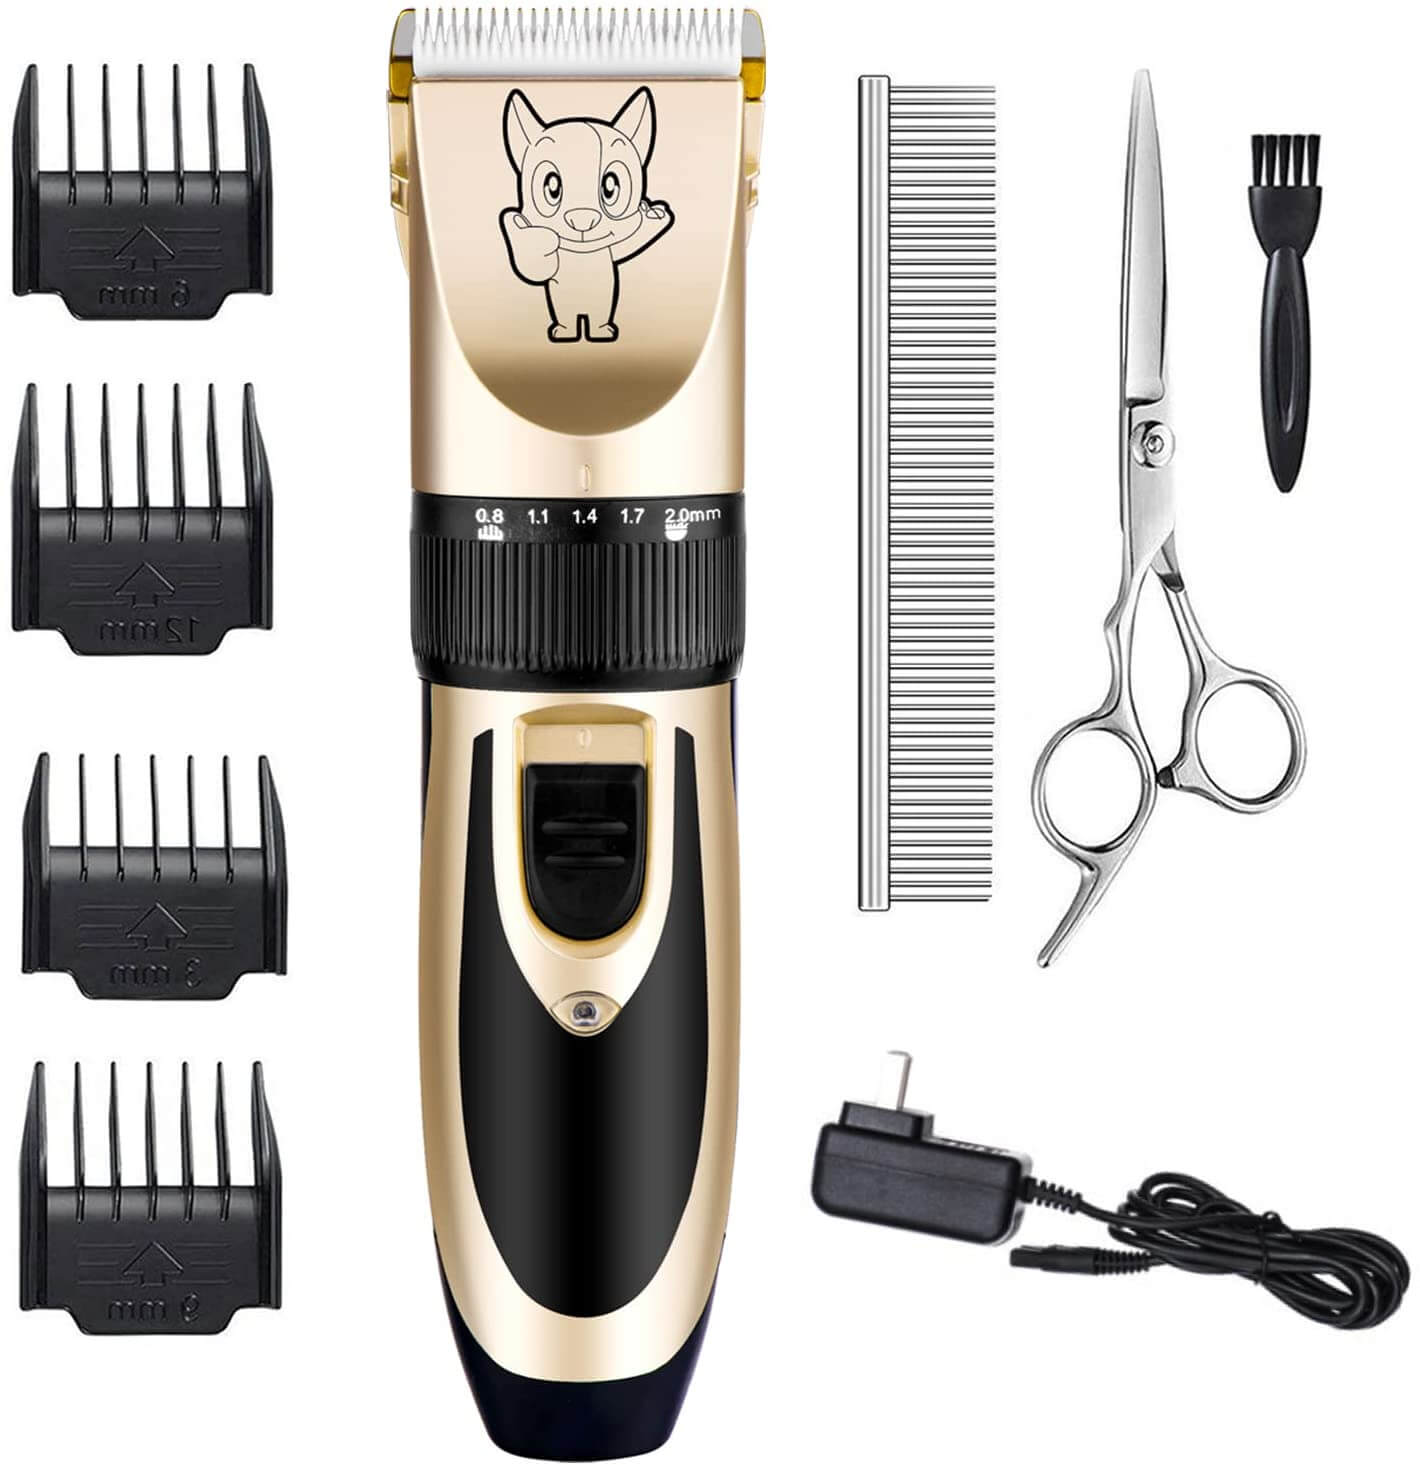 Highdas Dog Grooming Kit Clippers